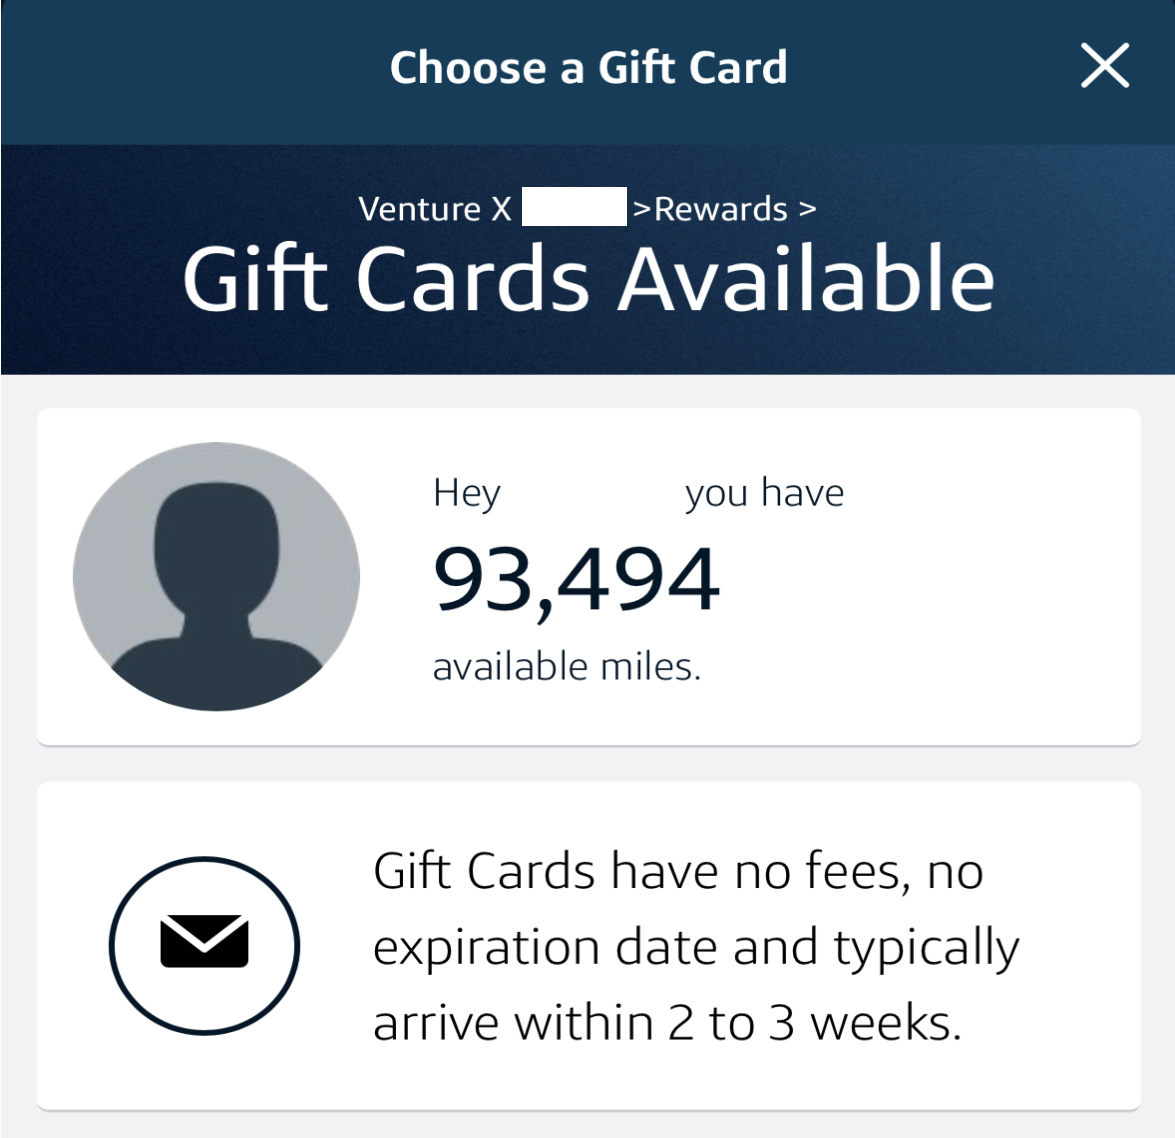 Book a gift card with Venture X miles